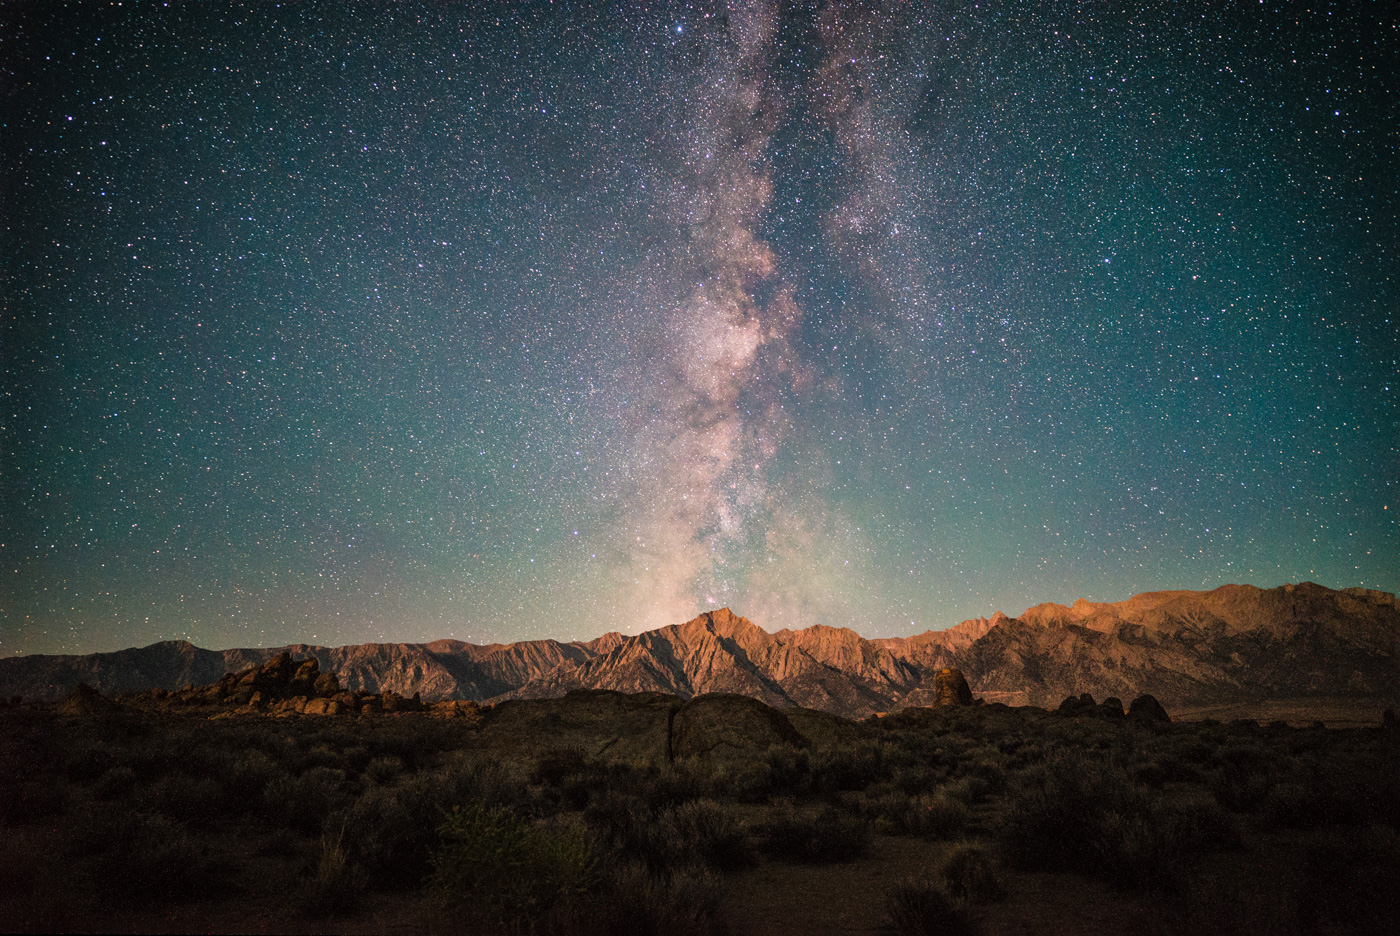 Milky Way over Lone Pine Peak. Diana (@northtosouthtravel) and I were out last night with @lance.keimig and more friends shooting some night photography. Got to witness the re-entry of the CZ-7 upper stage and got some great photos of the Milky Way with the new Zeiss 18mm/2.8 Batis. Captured this one just before leaving as the crescent moon started lighting up the Eastern Sierras. Pretty awesome night! Sony a7S, Zeiss Batis 18mm, f/2.8, 15s, ISO12800, stack of 8 exposures.